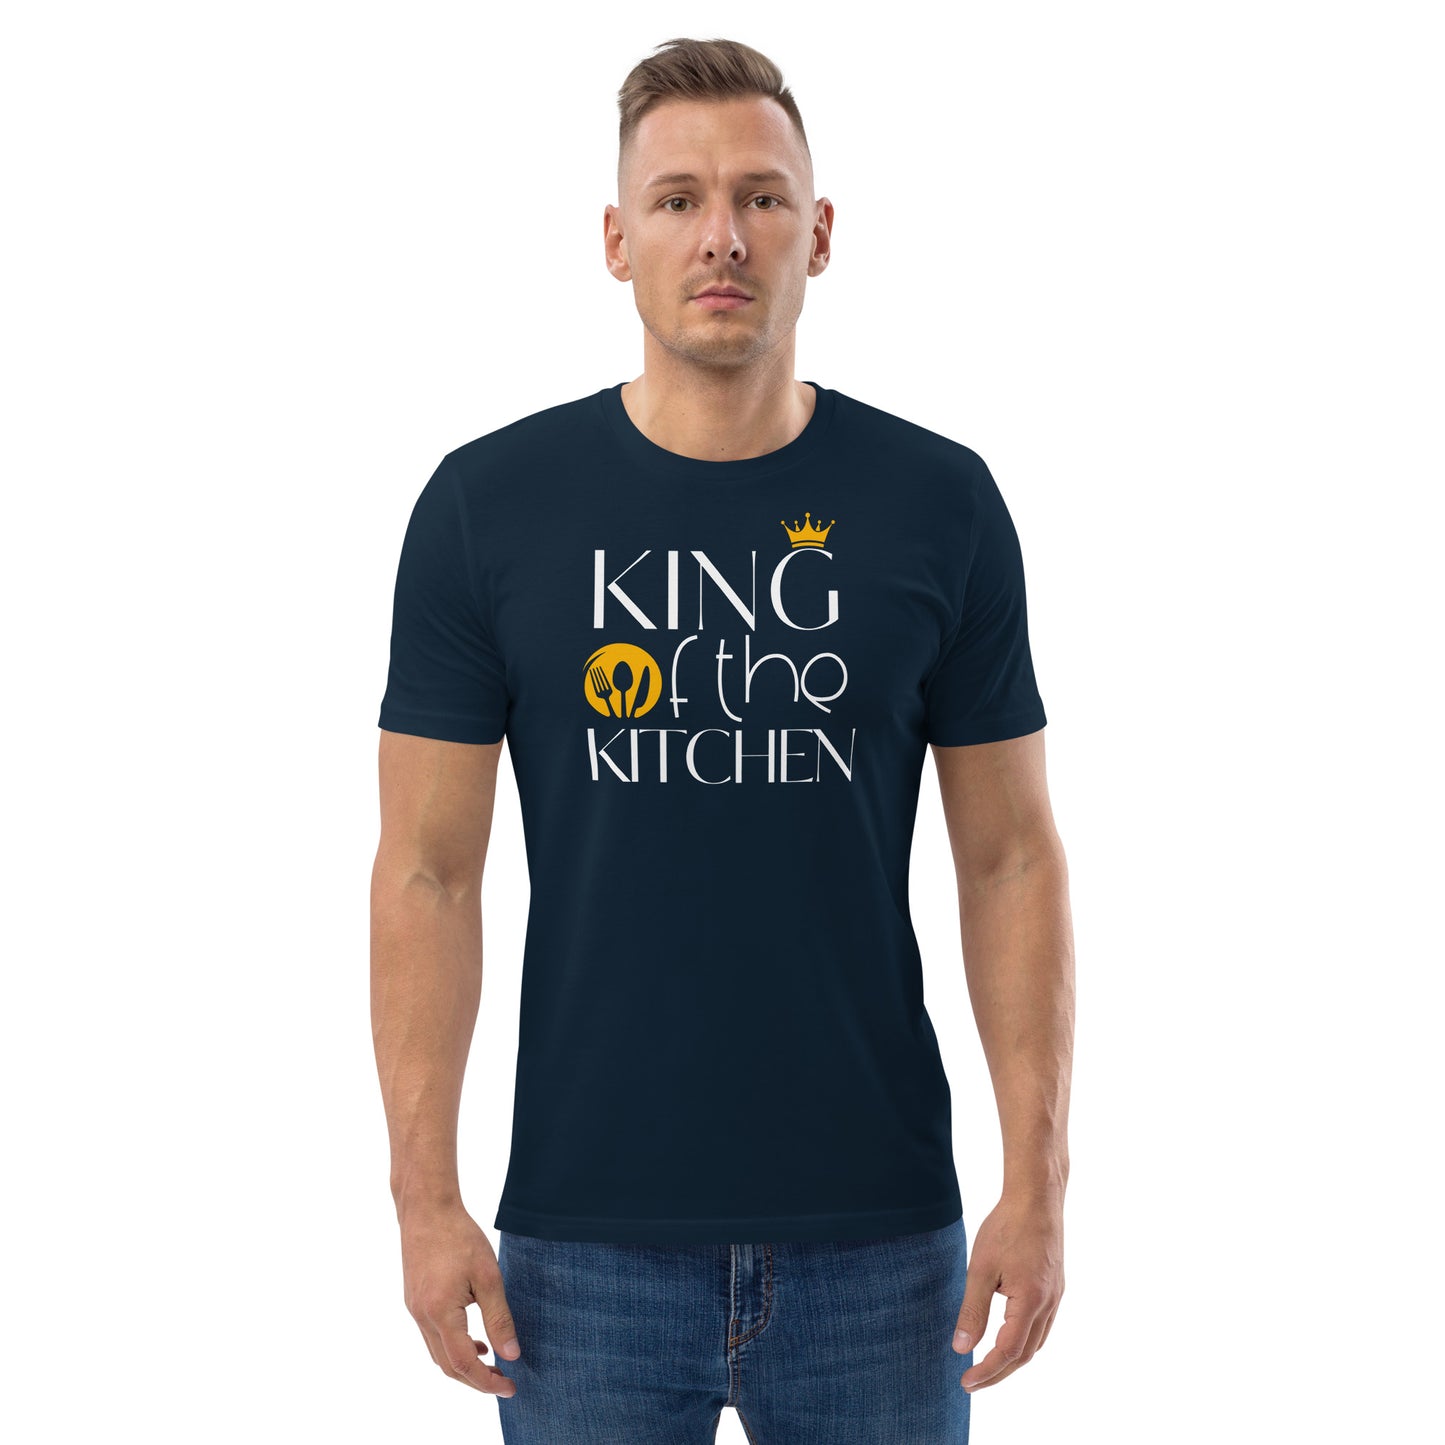 "King of the kitchen" custom made T-Shirt fpr Hobby Chefs, in navy